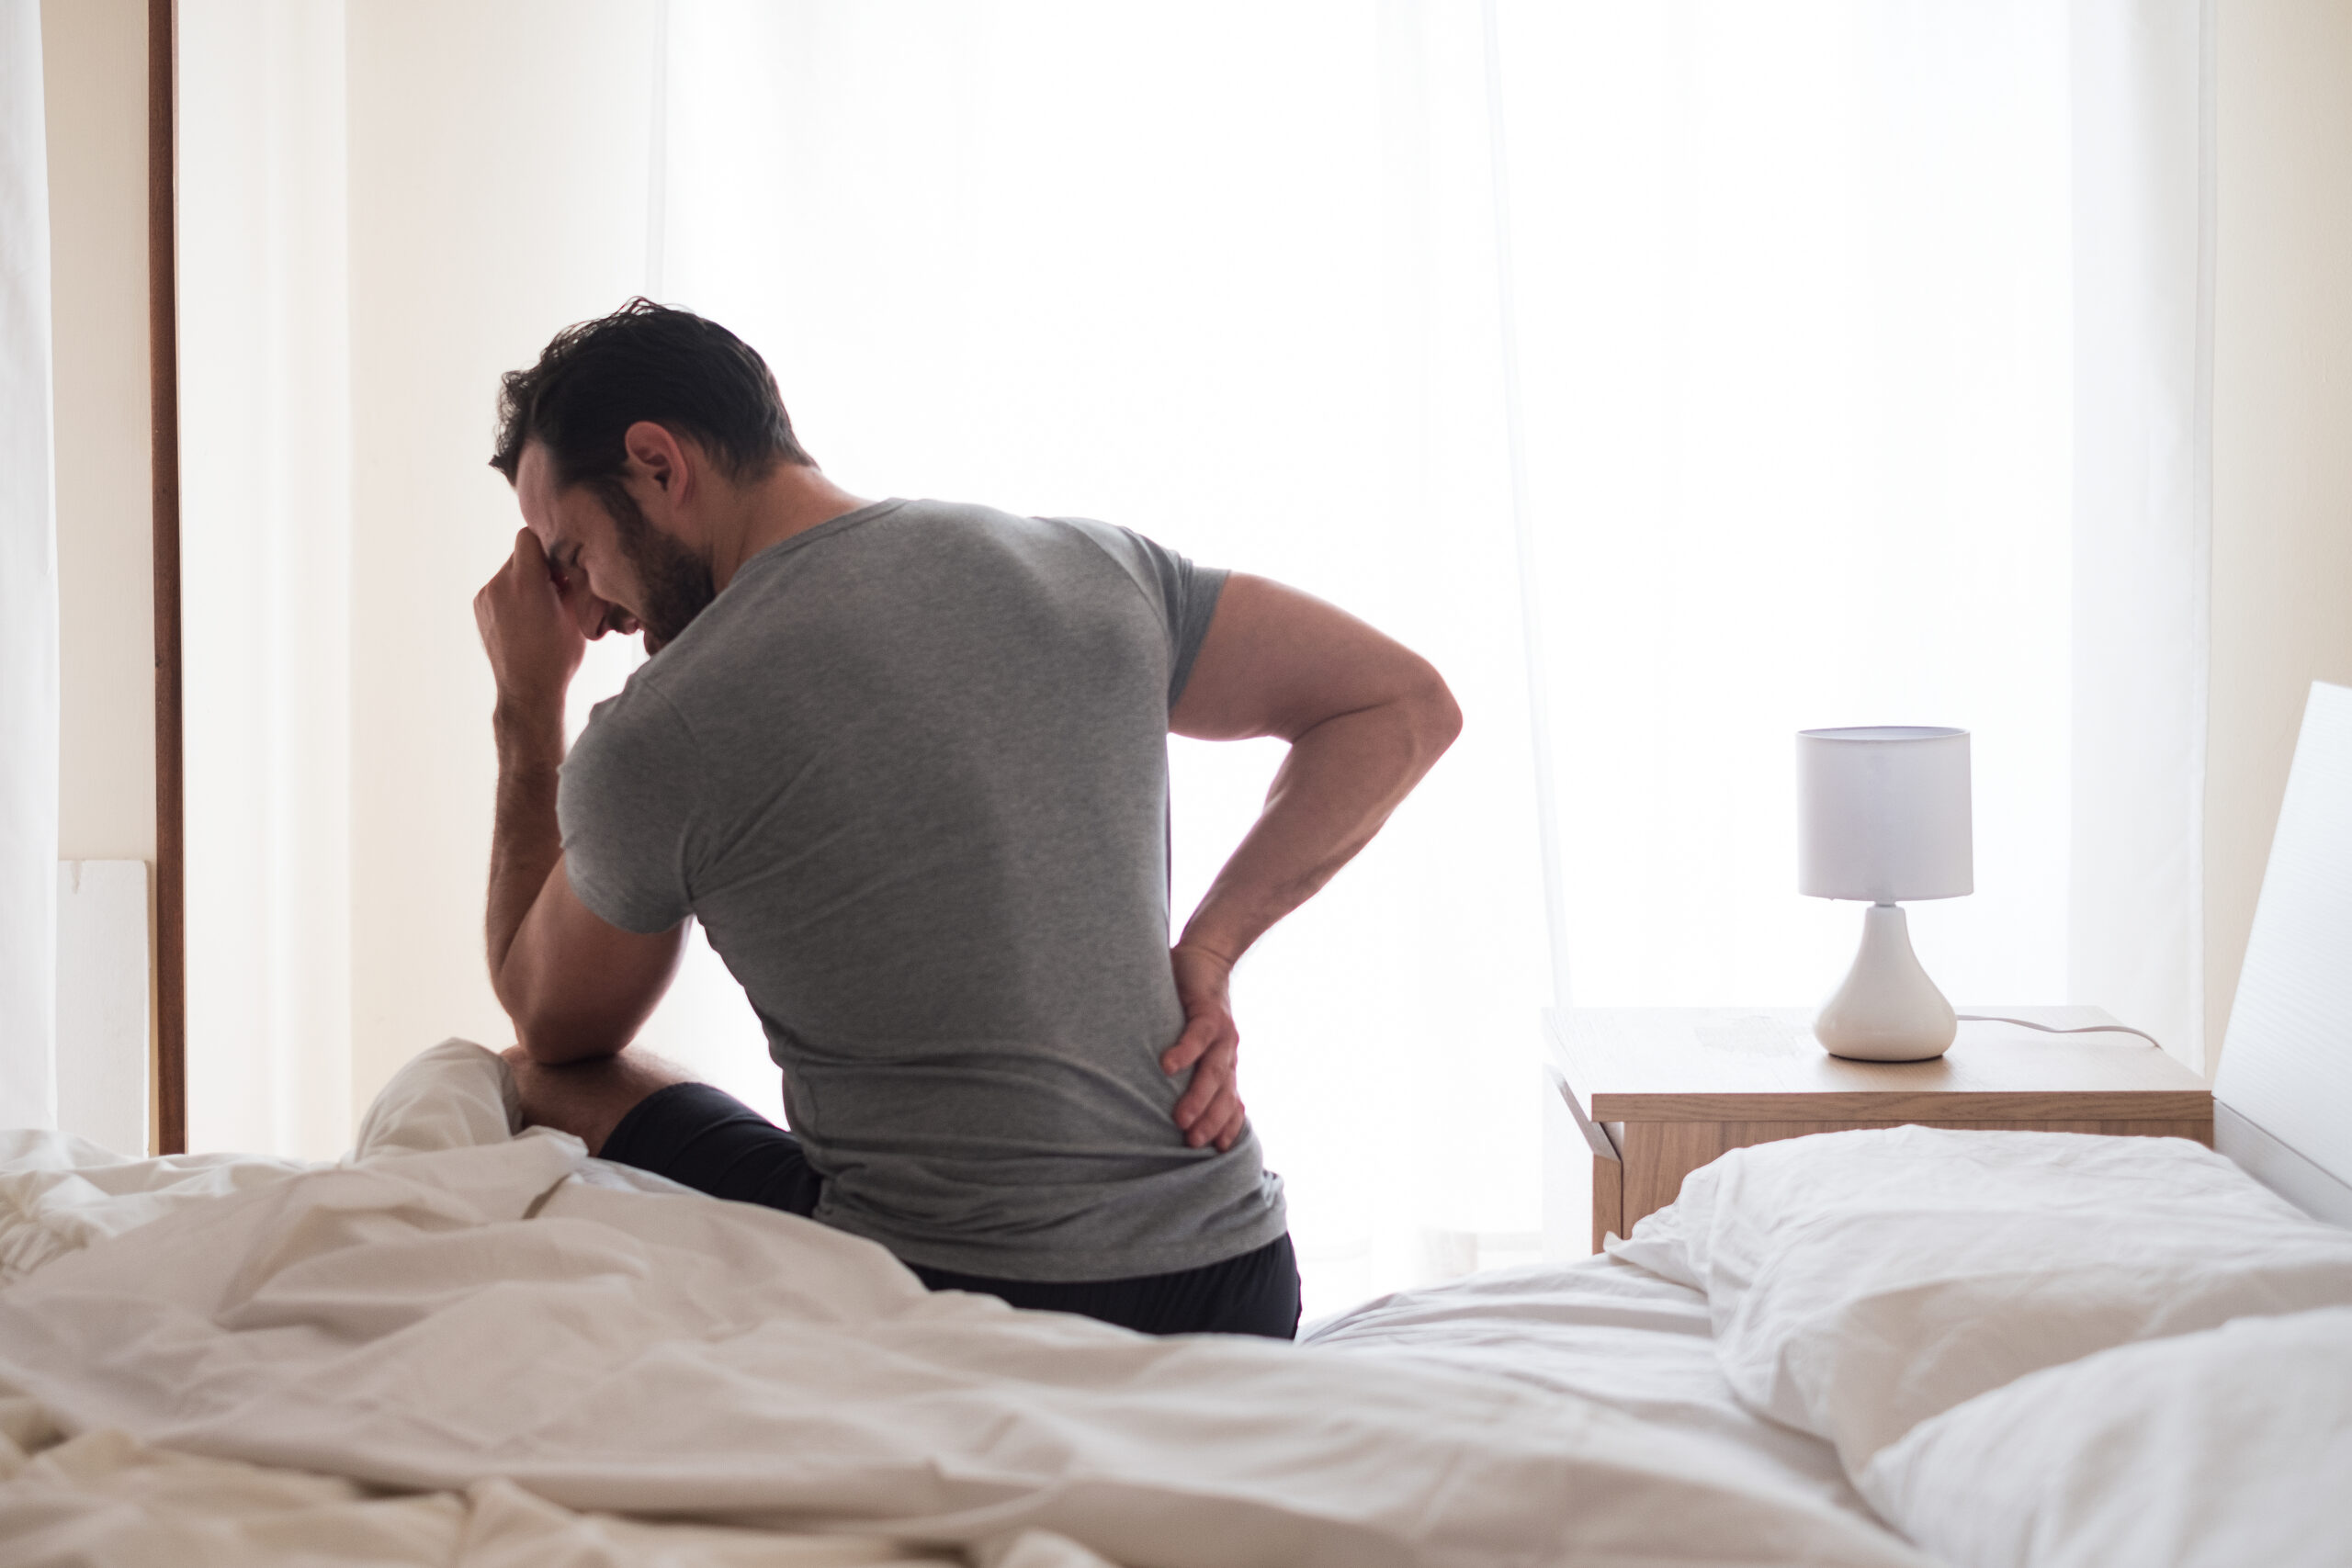 Dealing with Sciatica Pain in San Francisco? We Can Help.